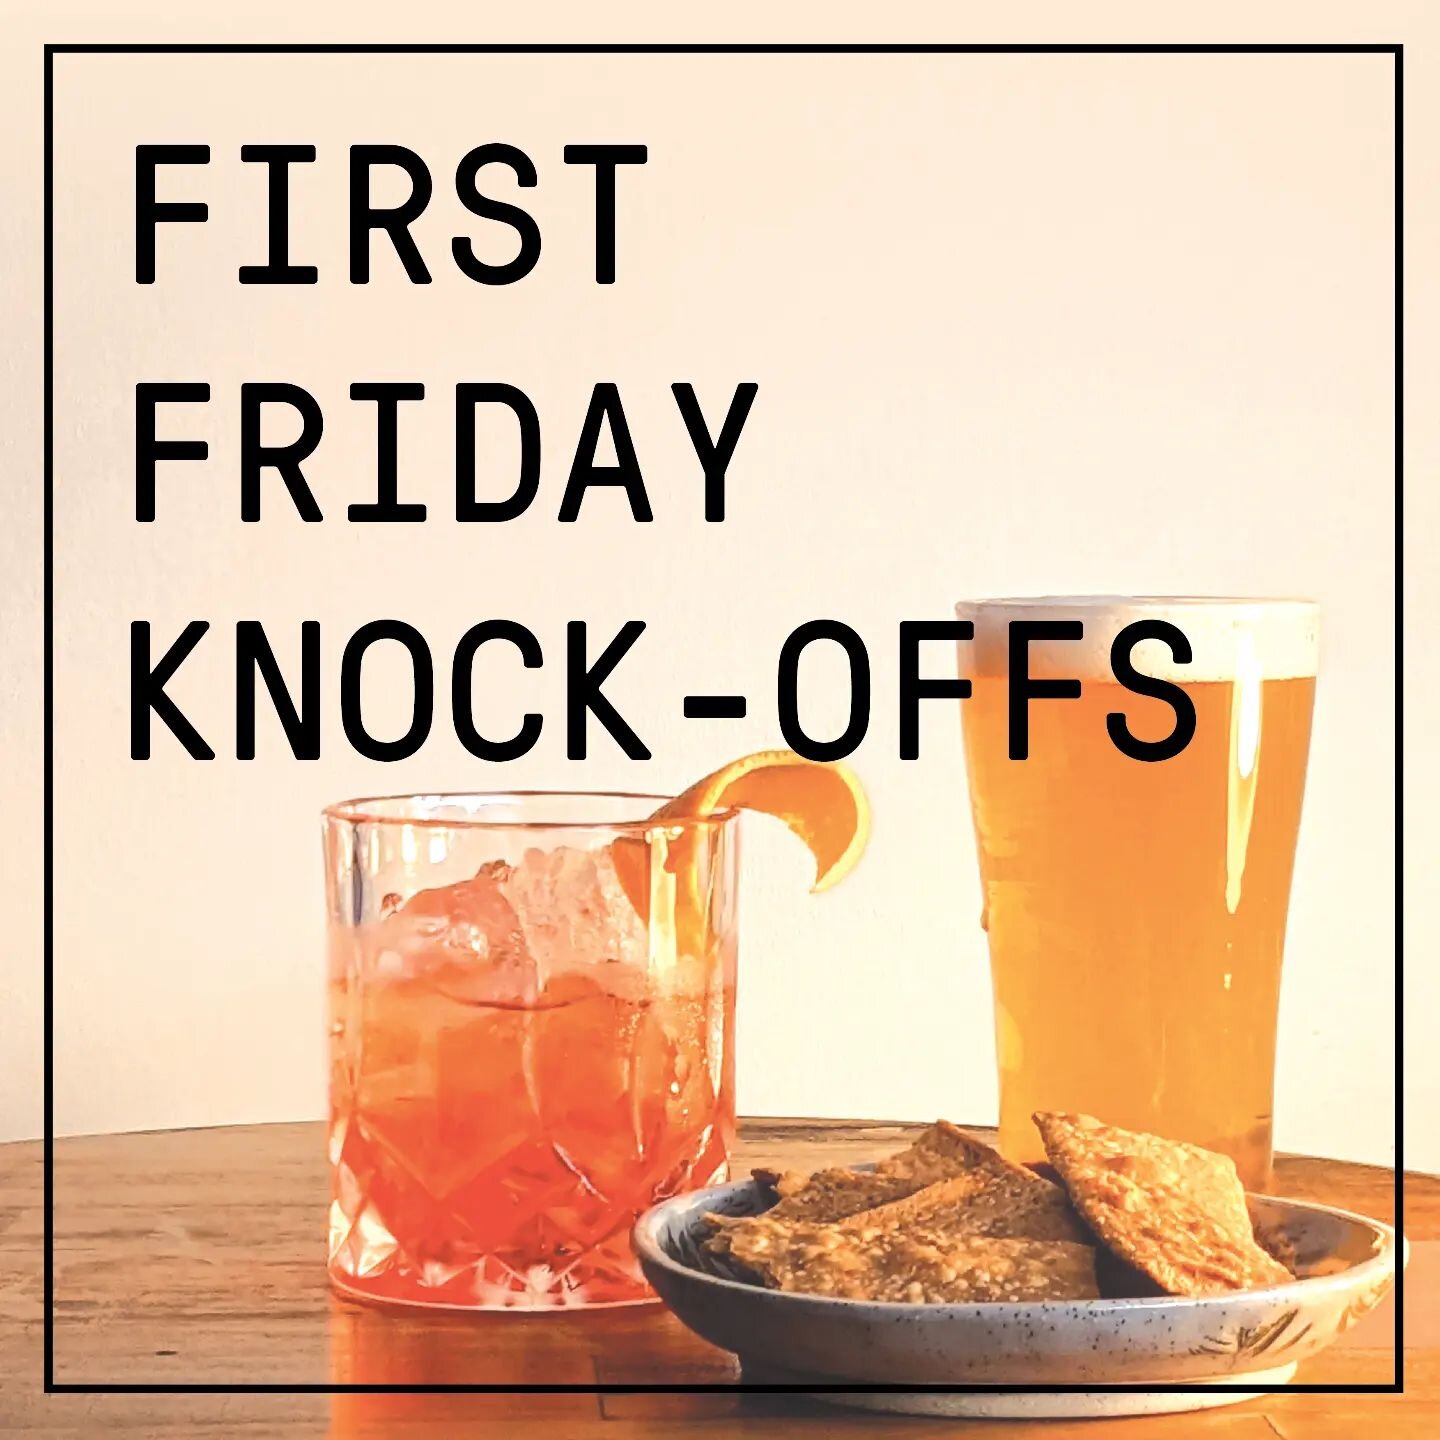 Join us this Friday for after work bevvies with complementary snacks 🍸🍿 Drop in from 3-7pm to celebrate the end of the week and beginning of the weekend!

Find us: 7 High Street, New Norfolk (near the council chambers)

#tgif #knockoffdrinks #unque